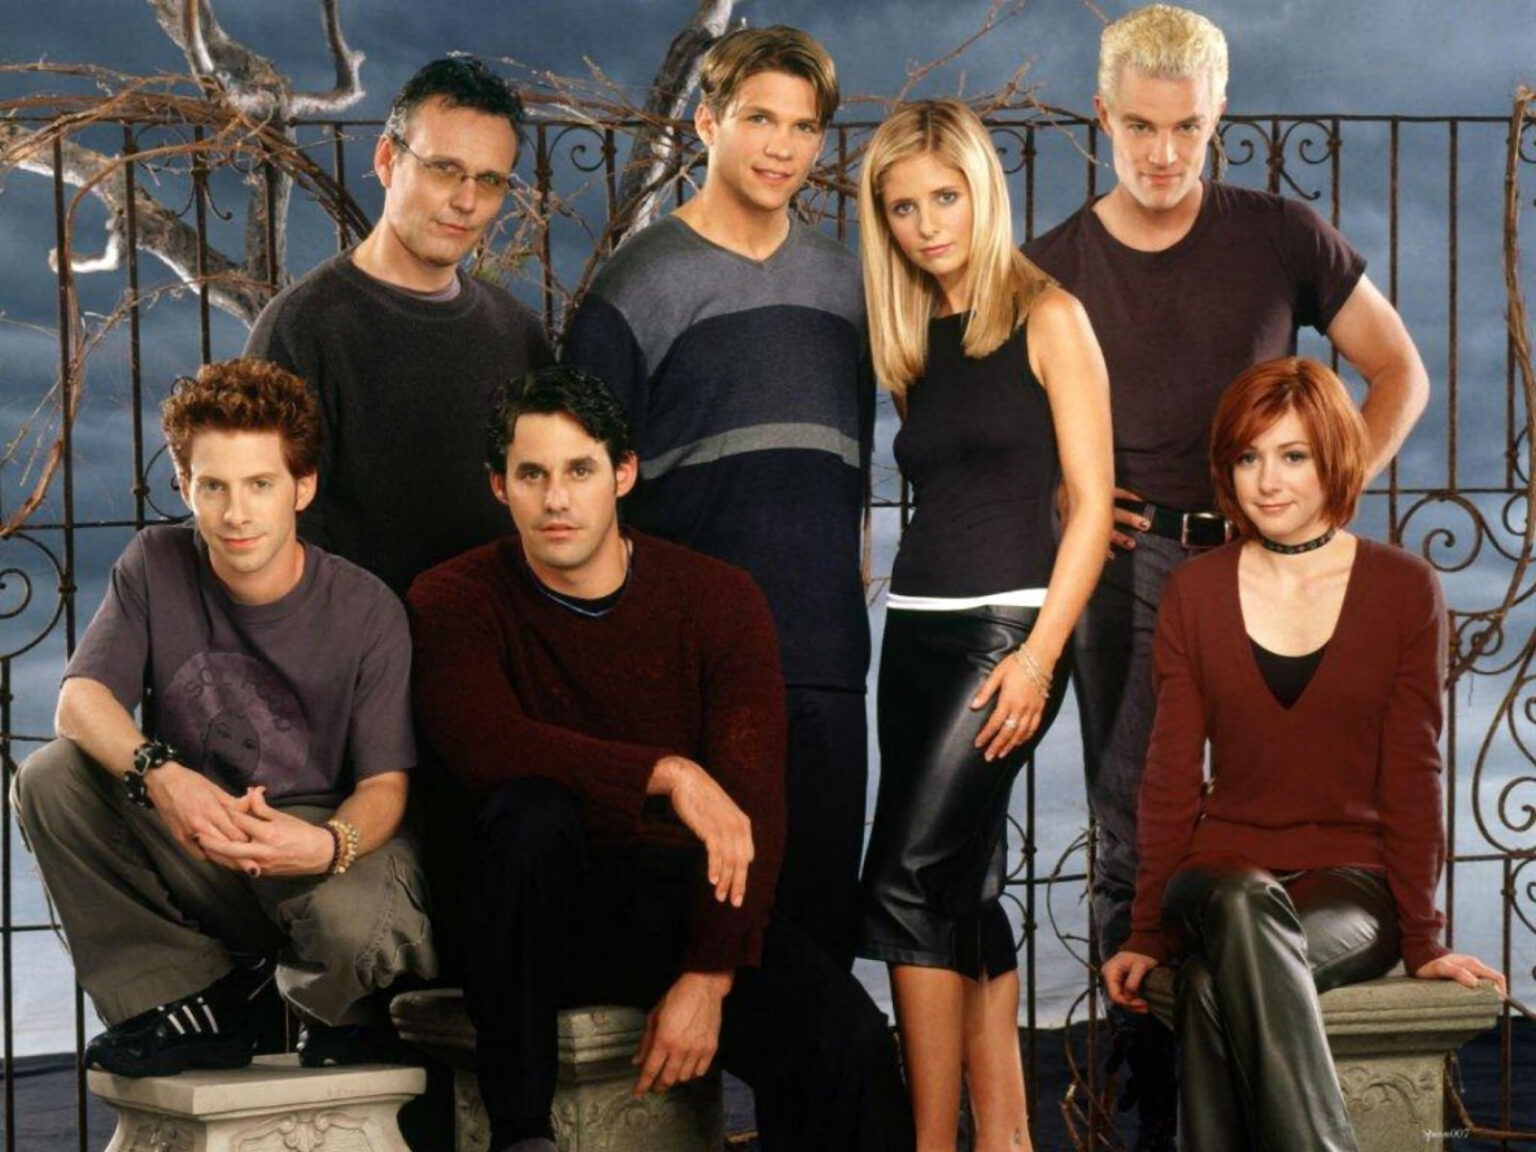 Is this Armageddon for Joss Whedon's career? Learn what the cast of 'Buffy the Vampire Slayer' is saying about working with him.